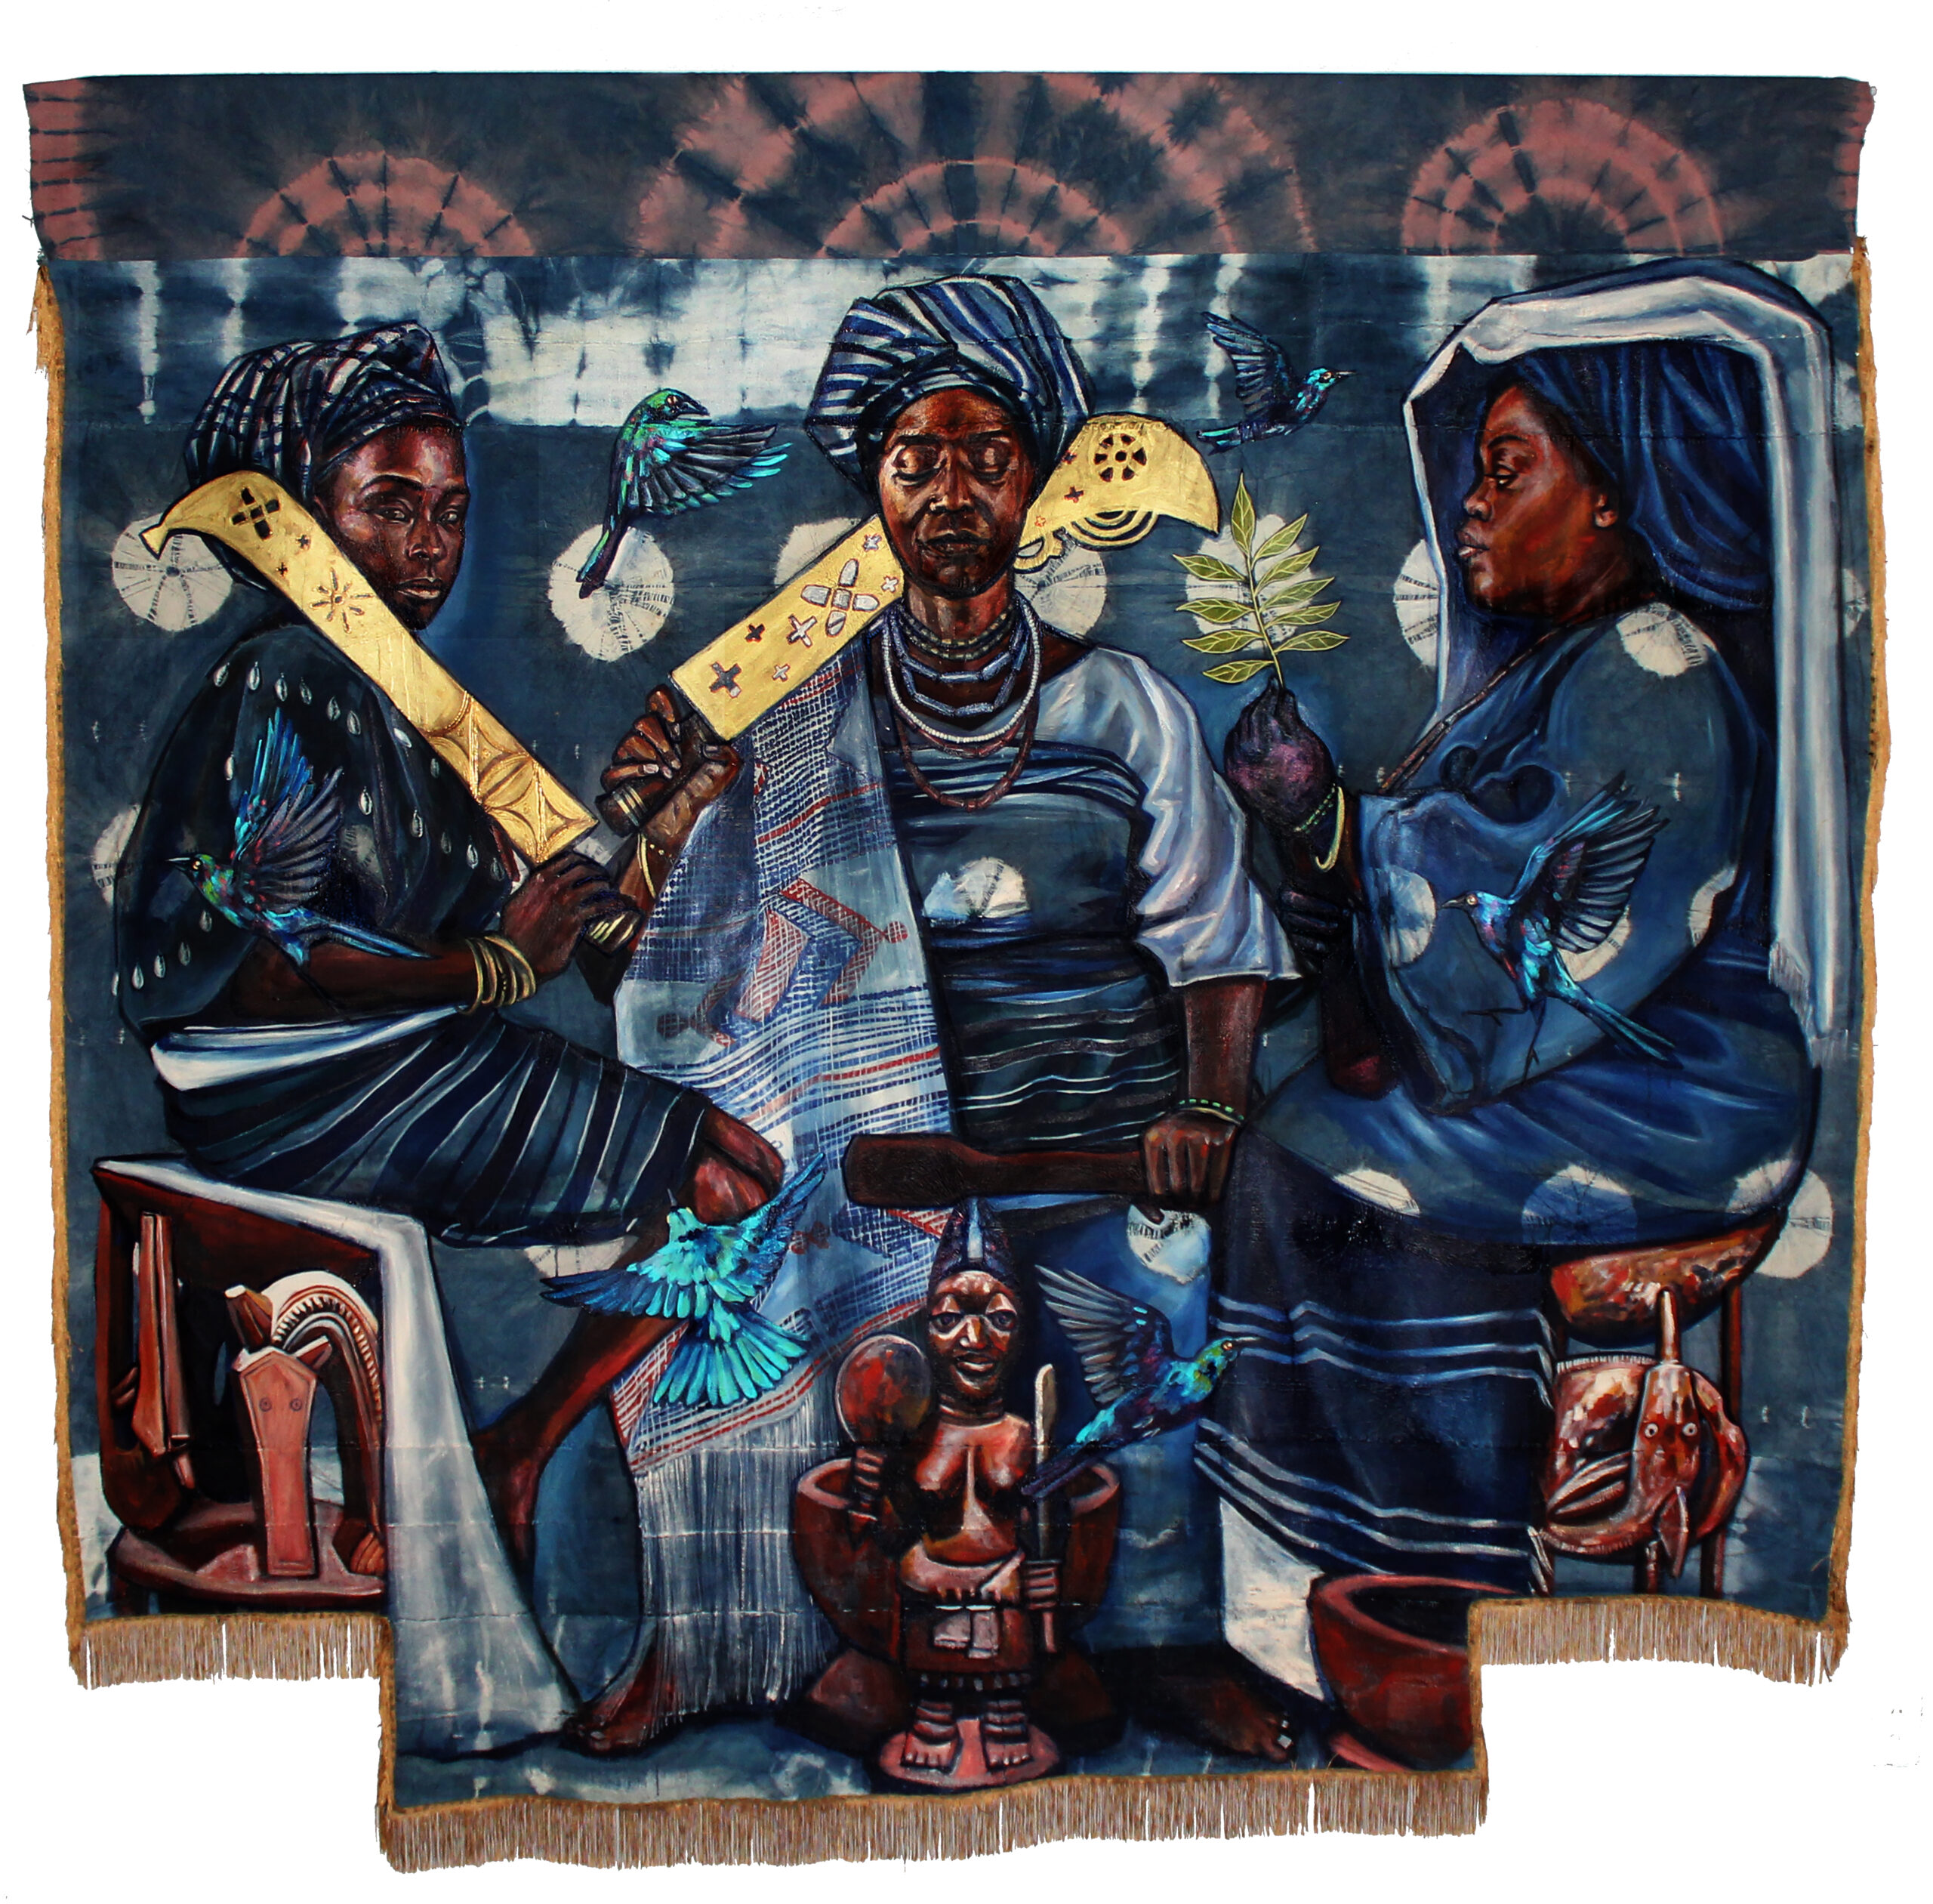 Press Release: The Indigo Project Unravels the Stories and Contributions of the African Diaspora through Indigo, Cotton, and Denim